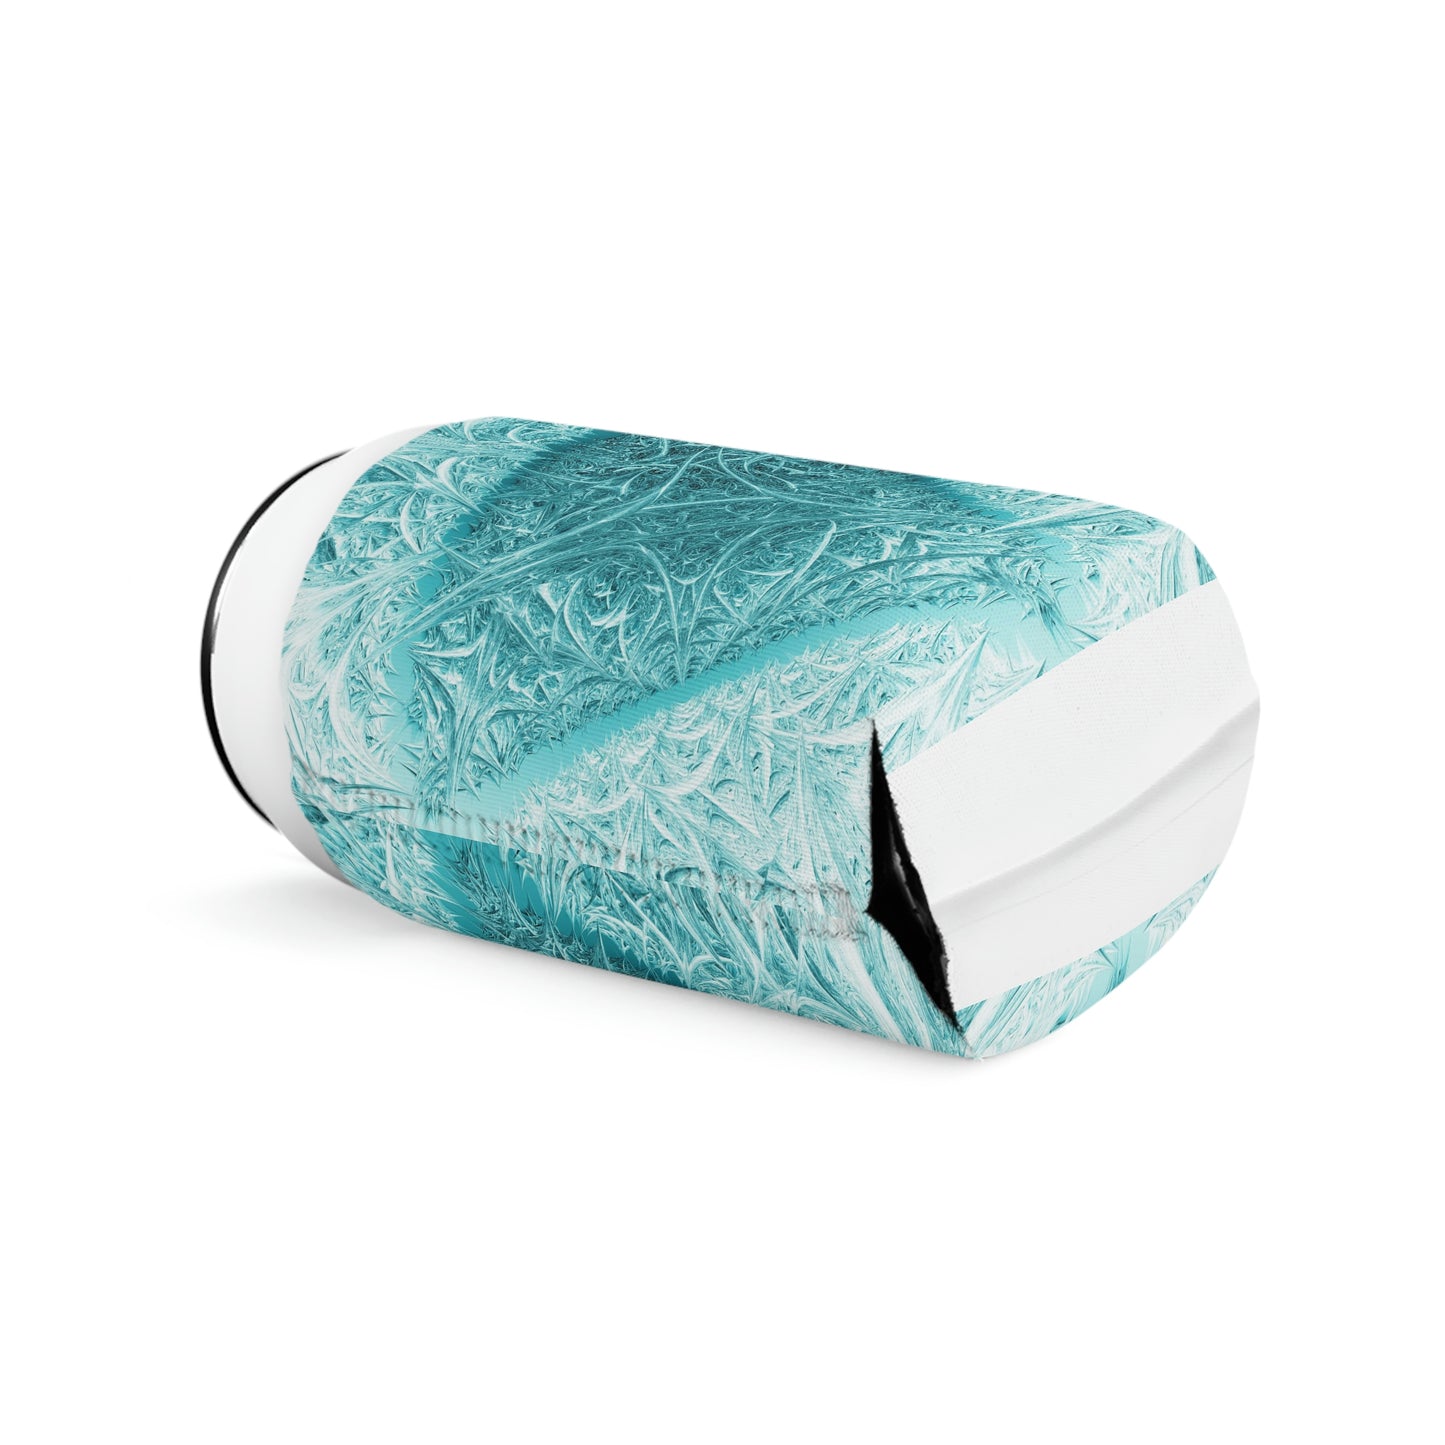 'Coastal Chill' Can Cooler Sleeve